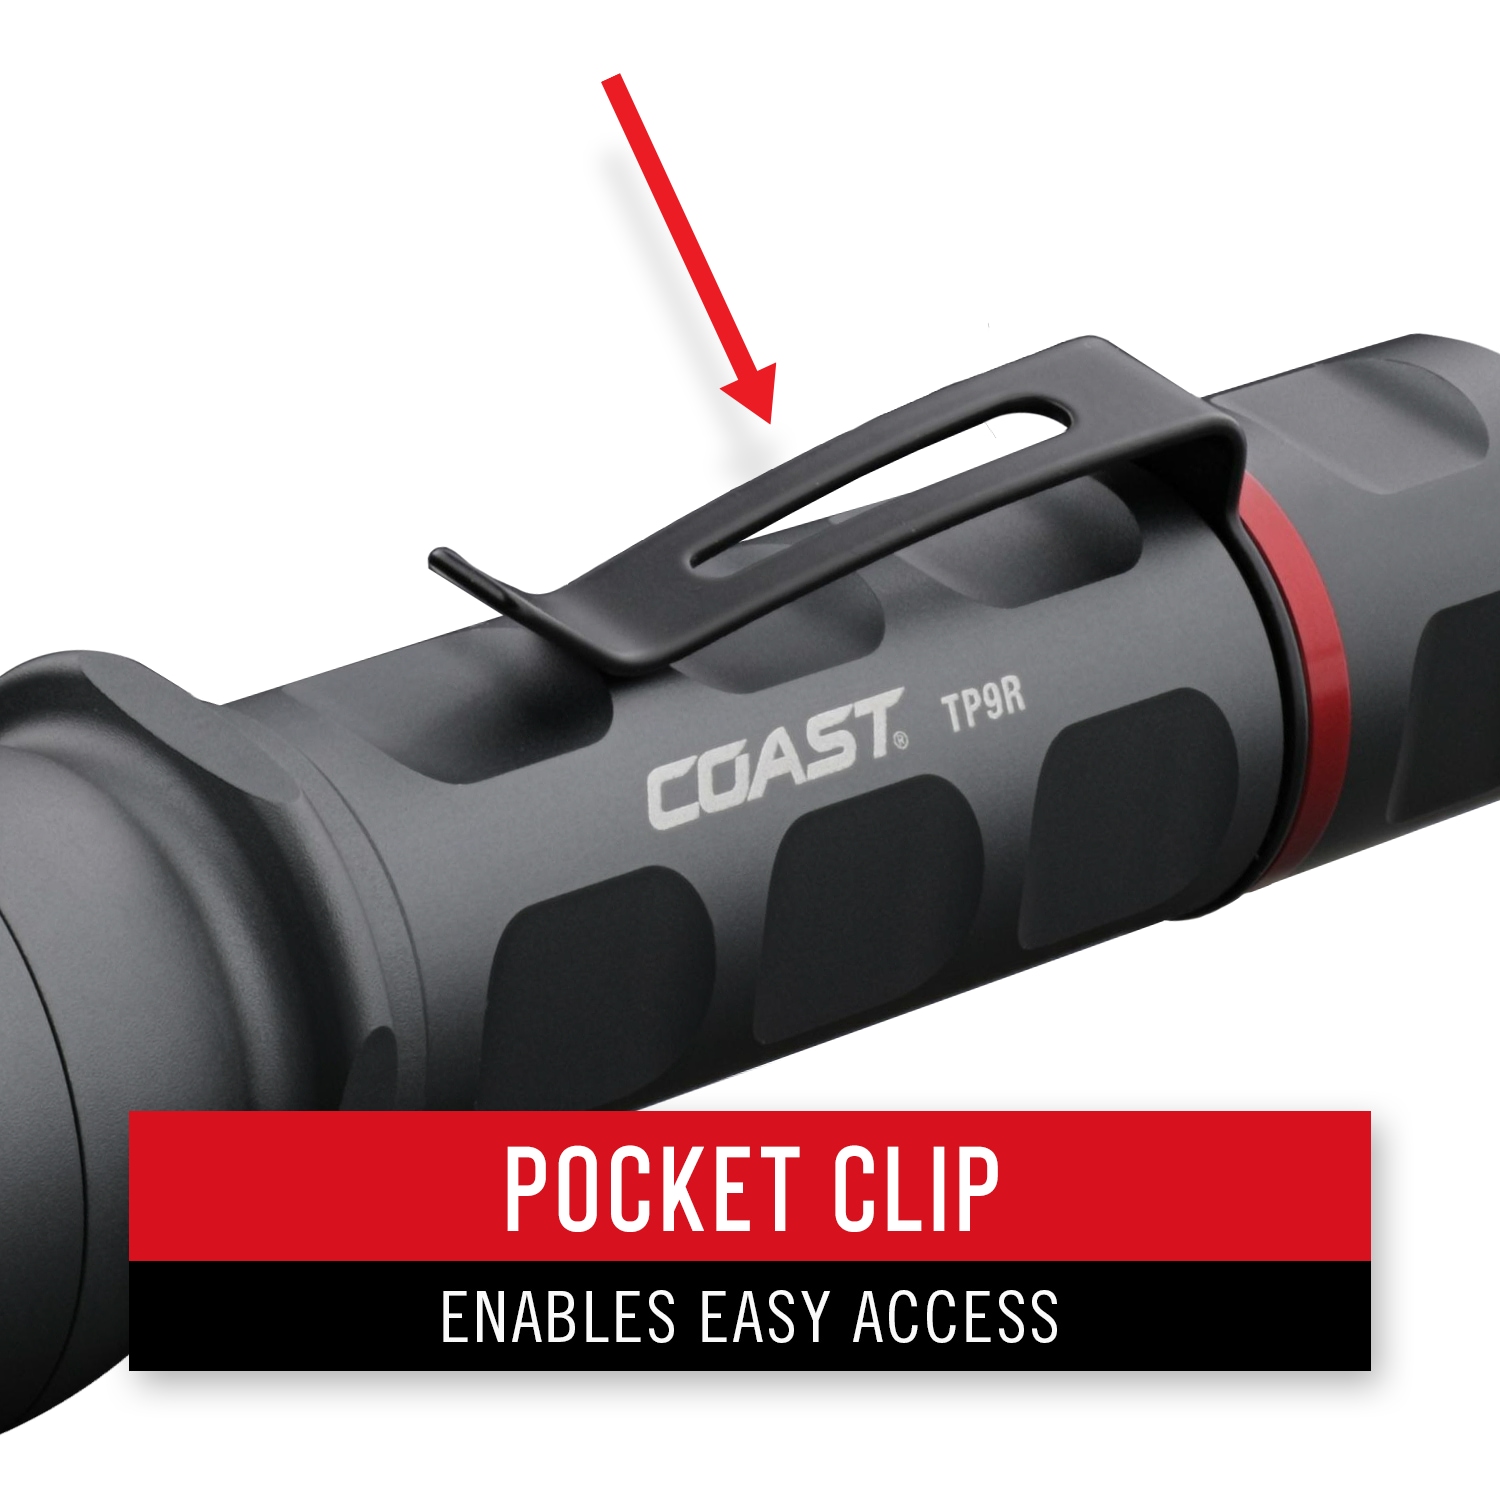 Coast TP9R Professional 1000-Lumen Modes LED Rechargeable Flashlight (Lithium Ion (3.7V) Battery Included) in the at Lowes.com